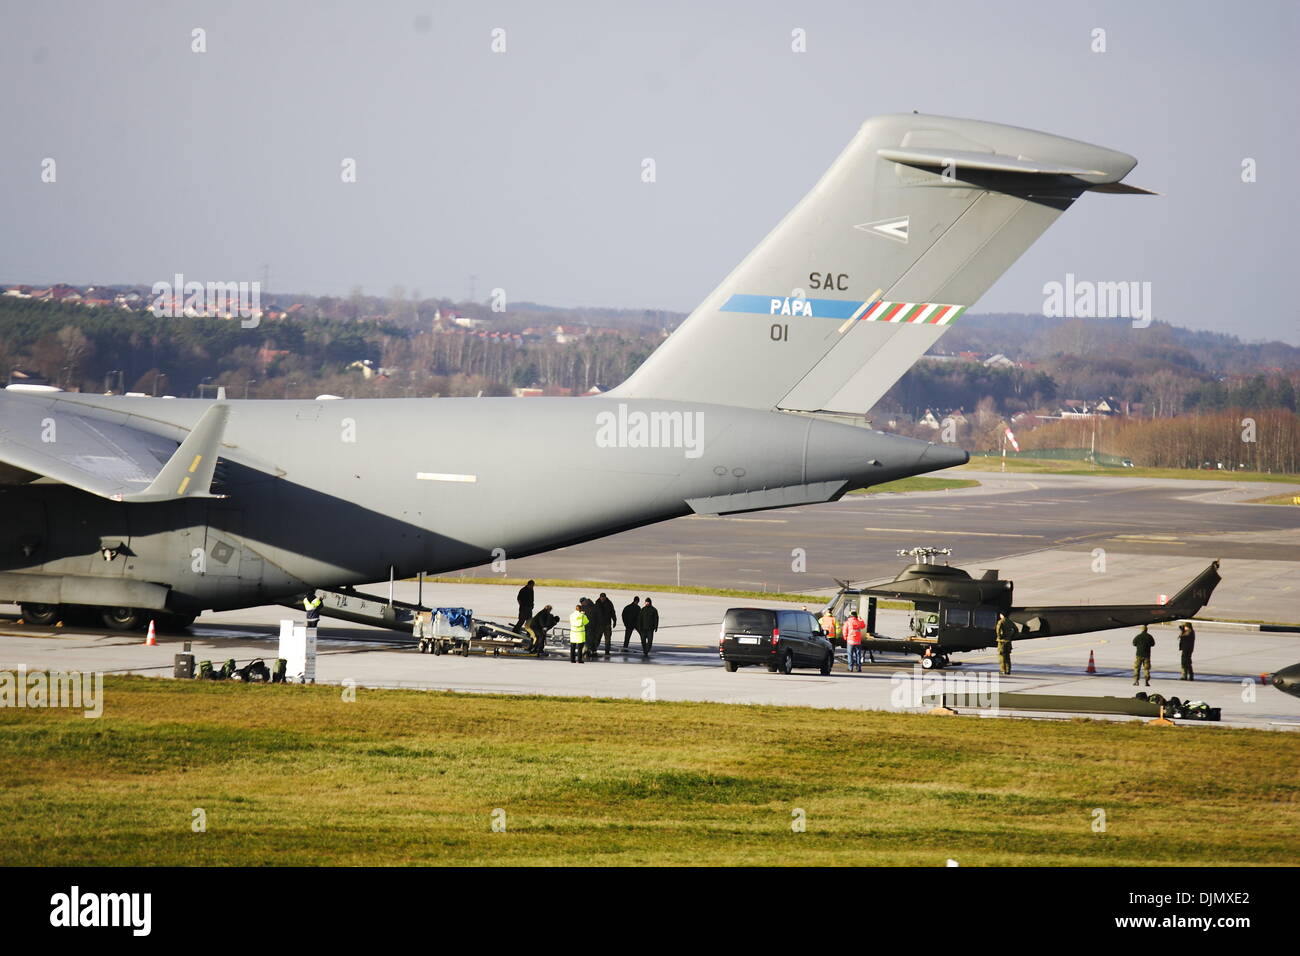 Gdansk, Poland 29th, November 2013 Loading two miliotary Bell 412 helicopters on the giant American transport aircraft  Boeing C-17 Globemaster board at the Gdansk Lech Walesa Airport. Credit:  Michal Fludra/Alamy Live News Stock Photo